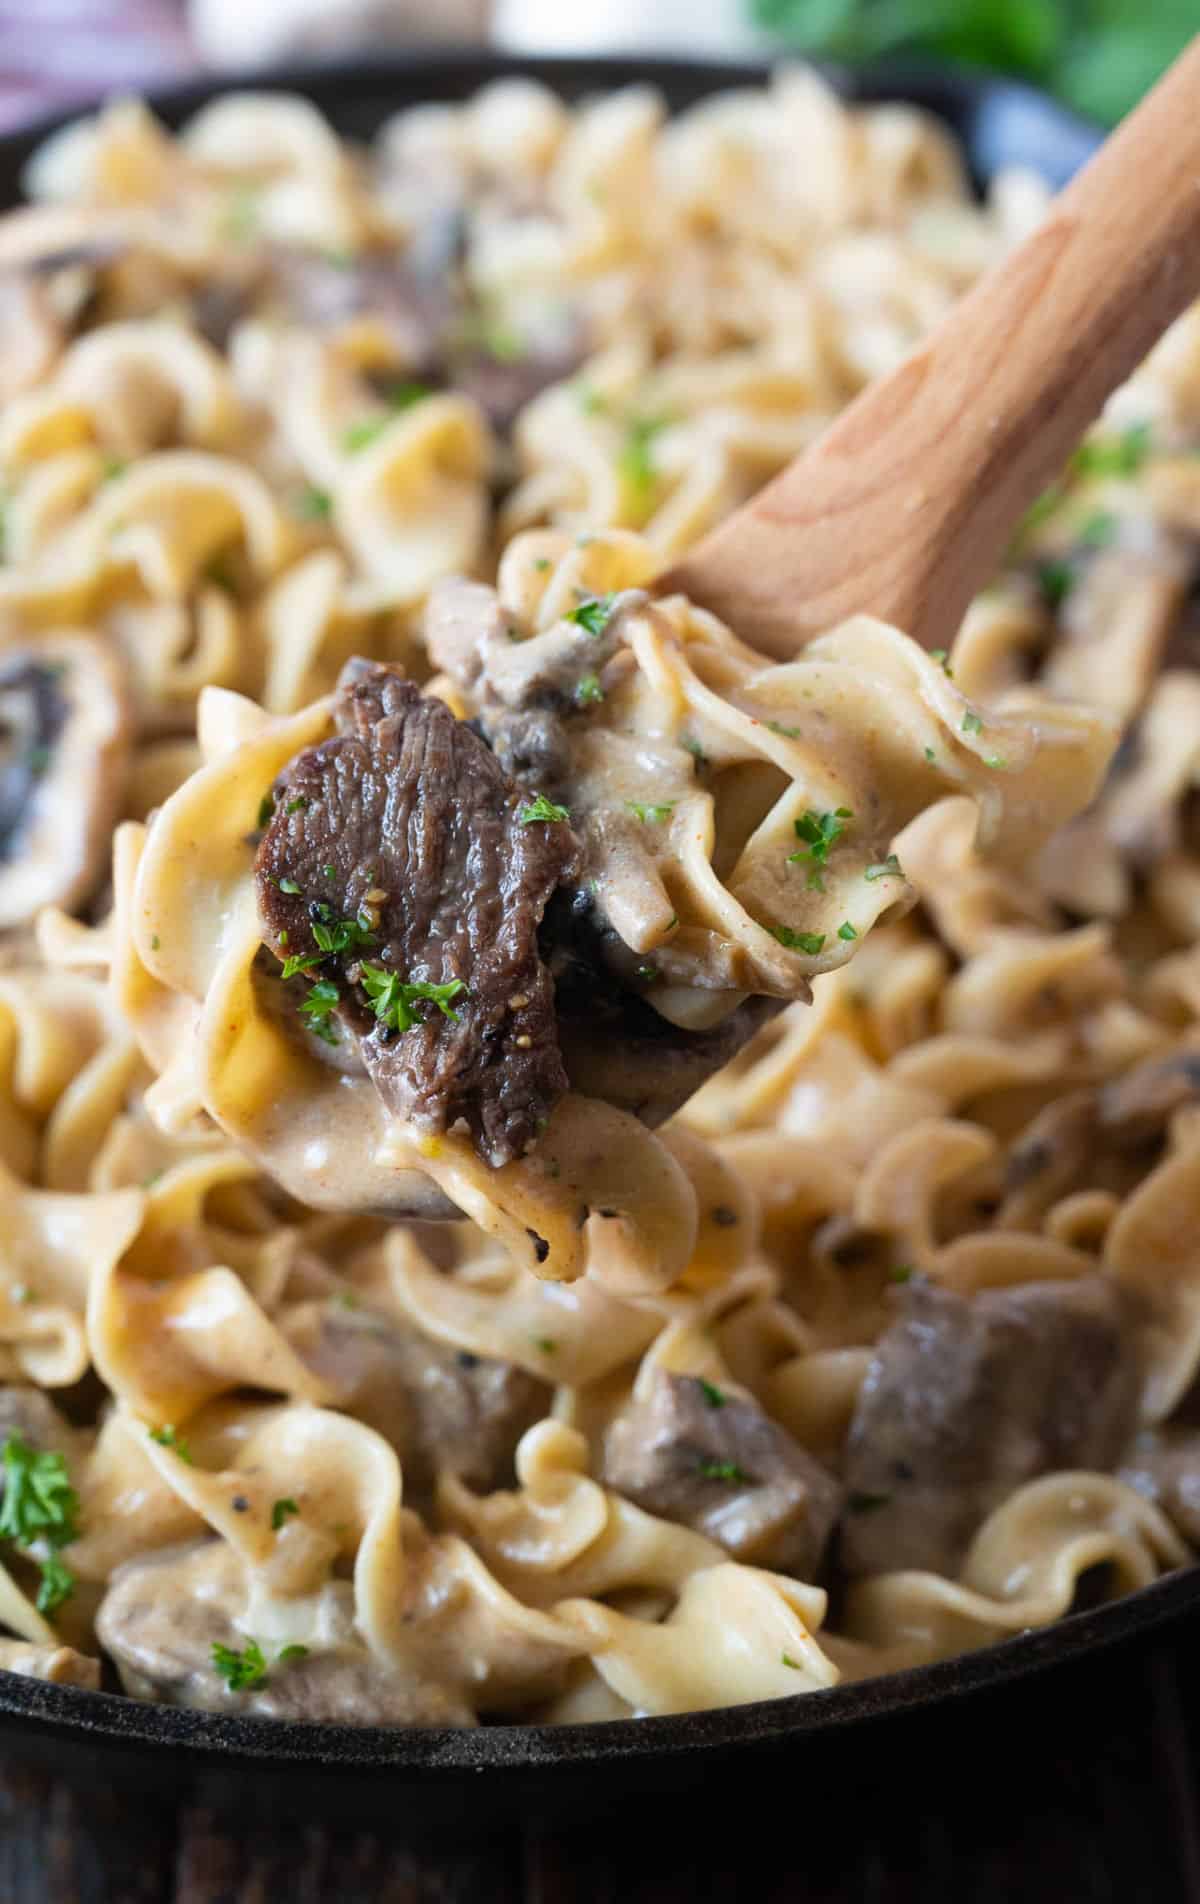 A wooden spoon scooping up a serving of beef stroganoff.